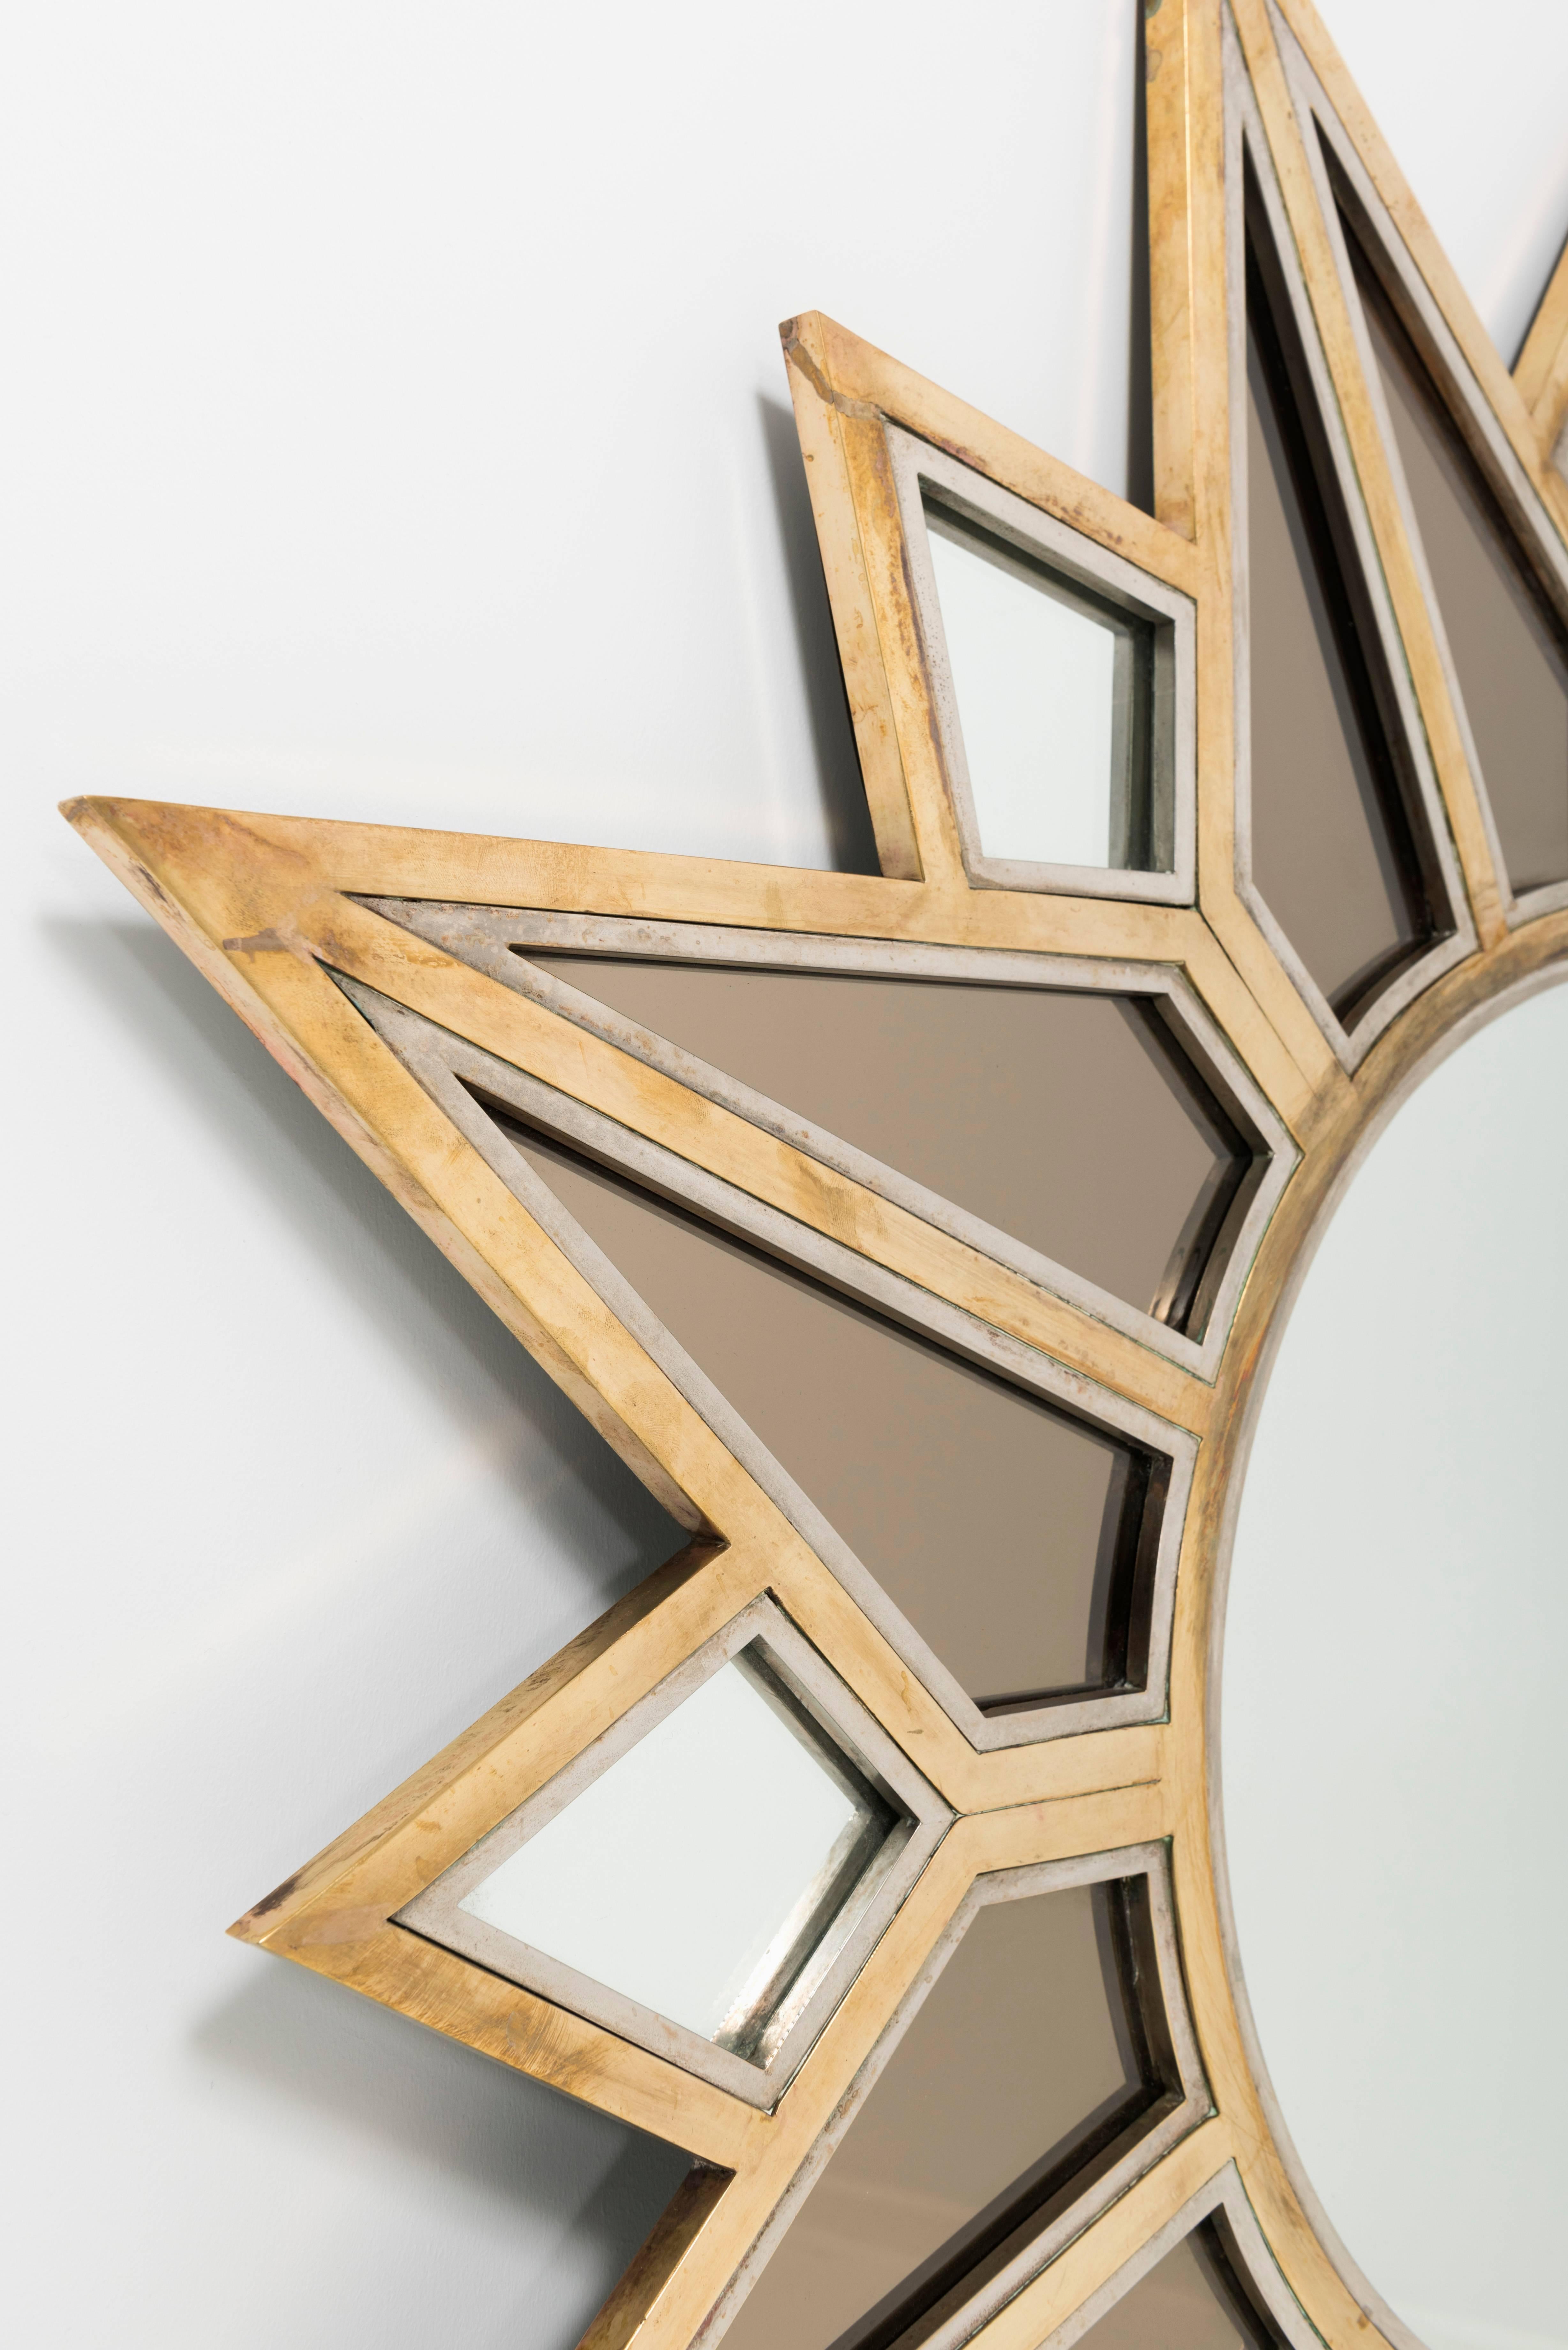 Big vintage mirror like a big star in brass, smoked and white mirror, the internal mirror is round design by Romeo Rega, Italy, circa 1970
Measures: Diameter 119 cm.